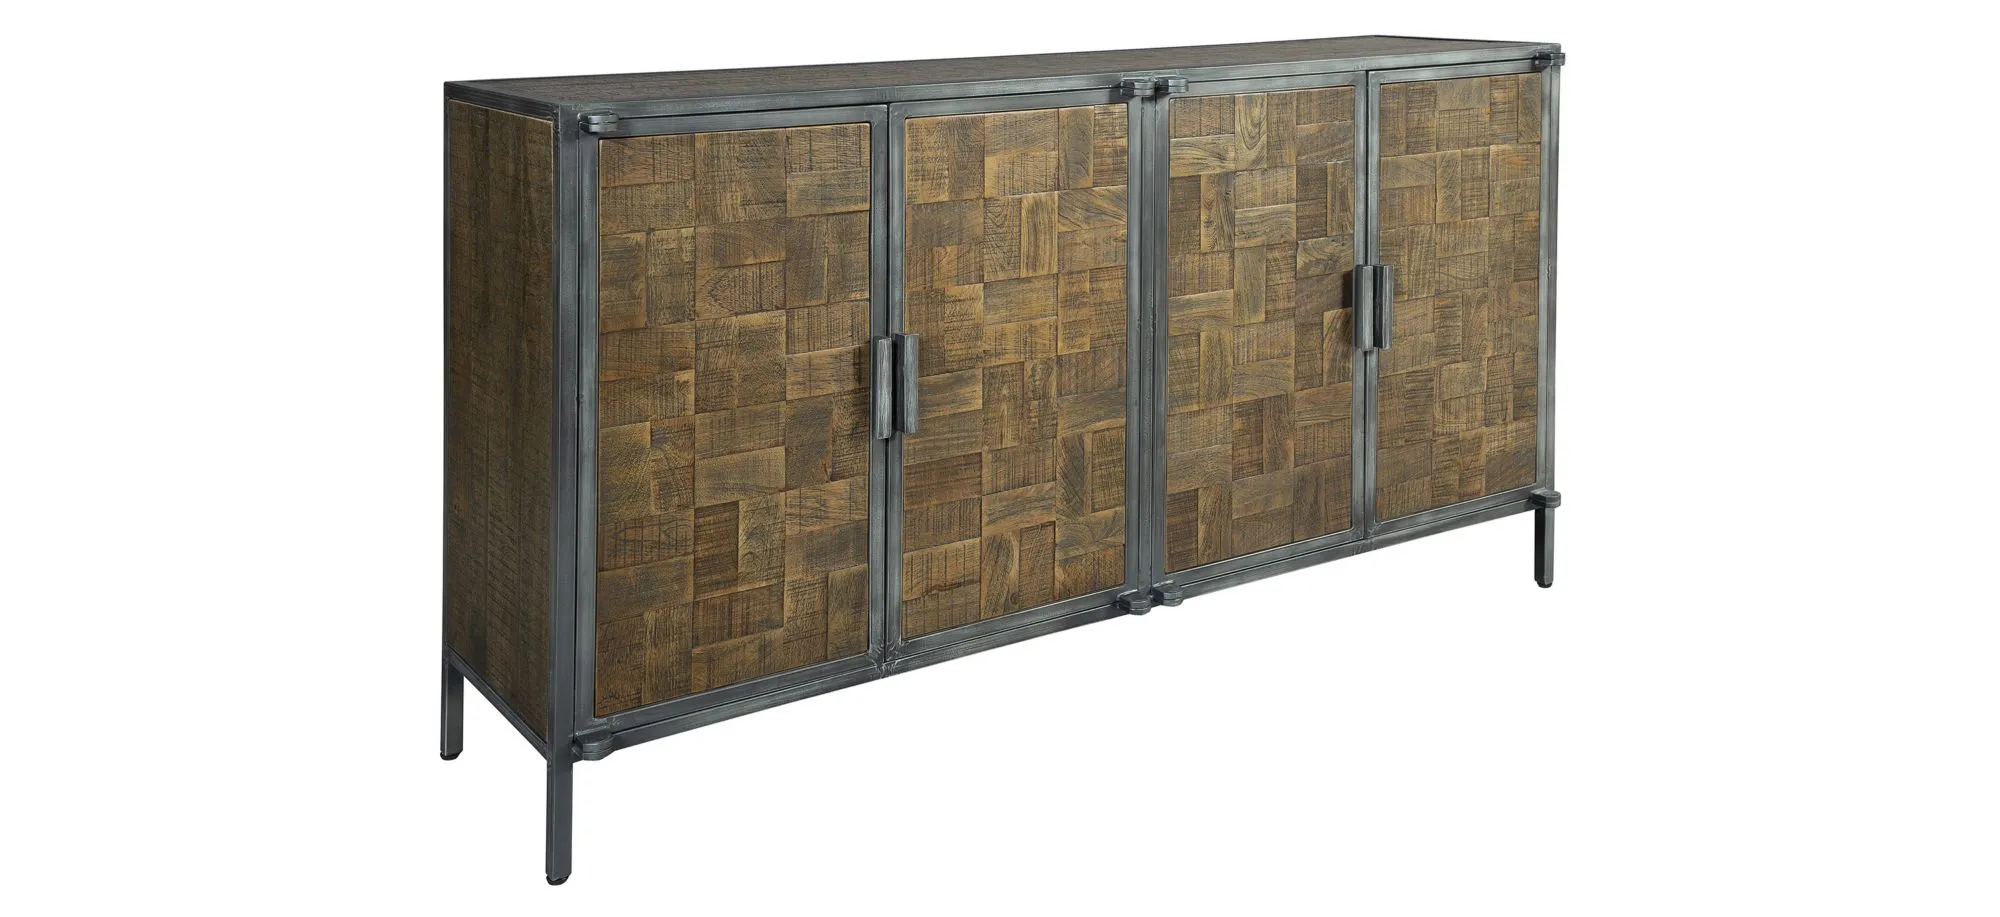 Verdi Entertainment Console in SPECIAL RESERVE by Hekman Furniture Company